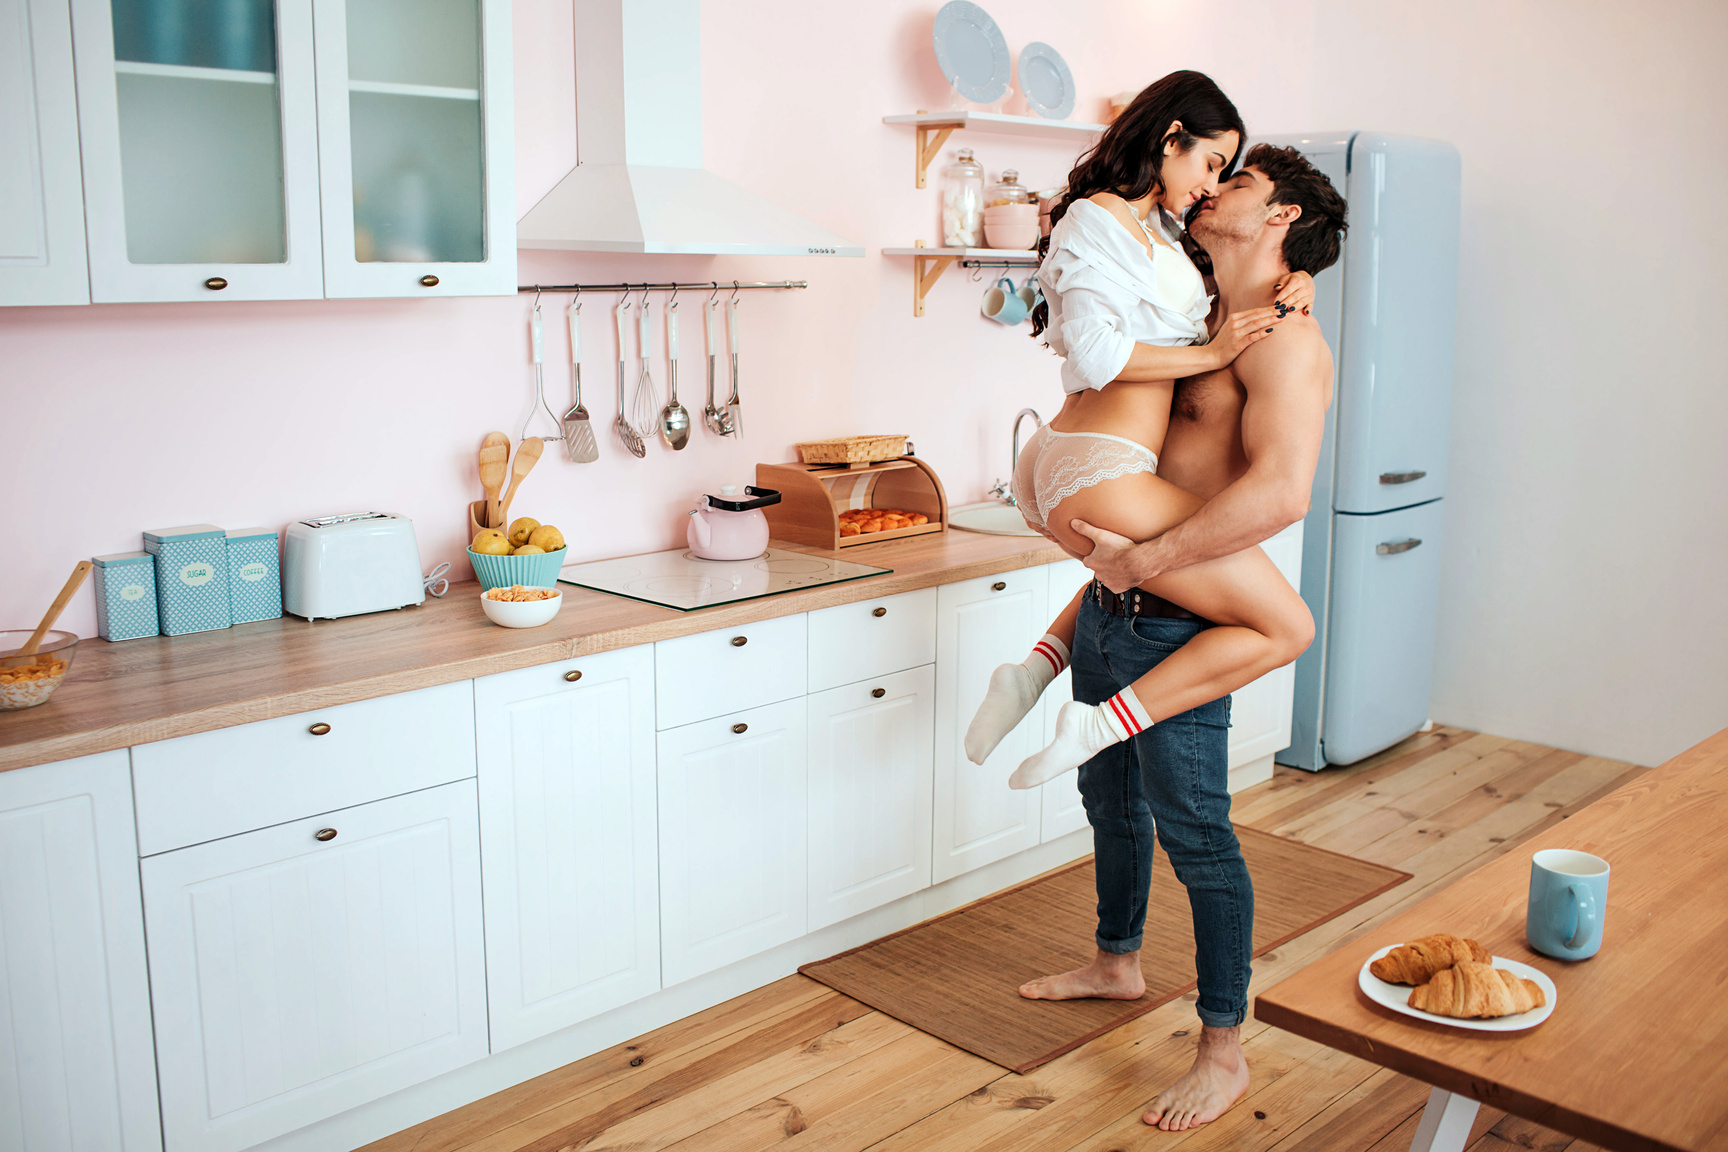 Sexy Young Couple in the Kitchen